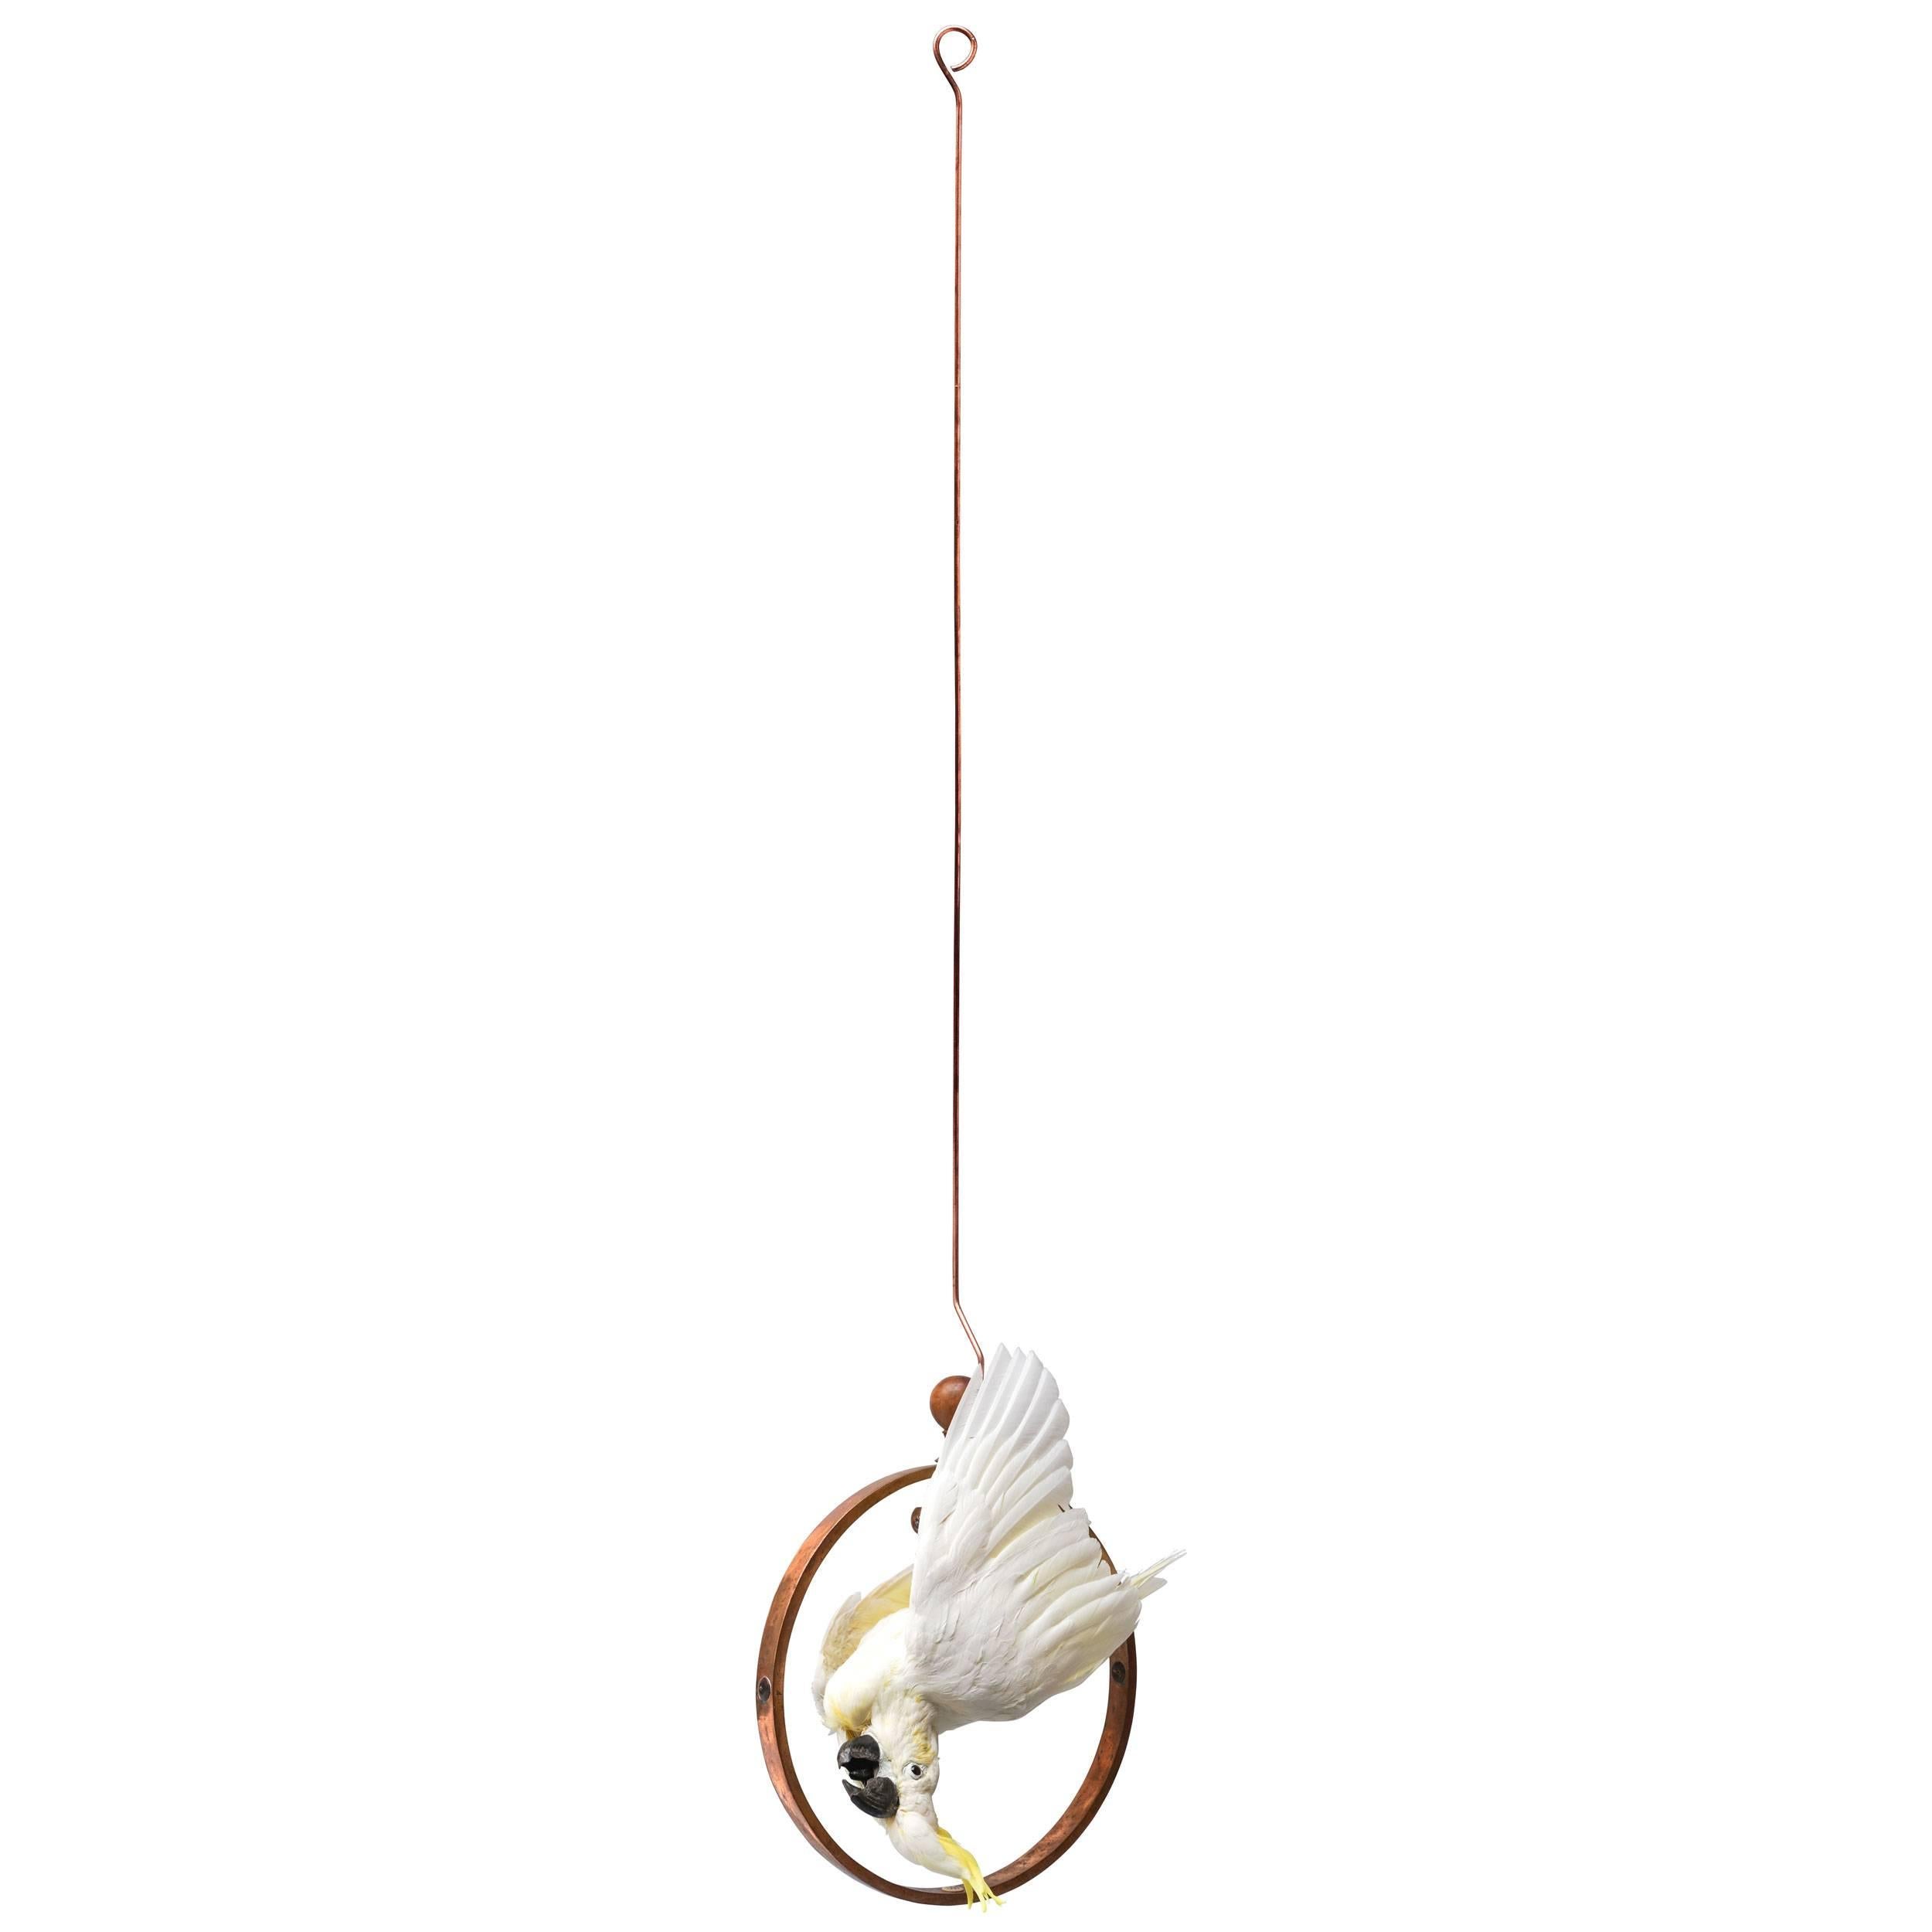 An acrobatic Cockatoo showing off on a hanging brass ring from the early 20th century. Originally the Cacatua sulphurea lives on Celebes and some very small islands near Celebes. Although critically endangered this rare bird came from a zoo after it